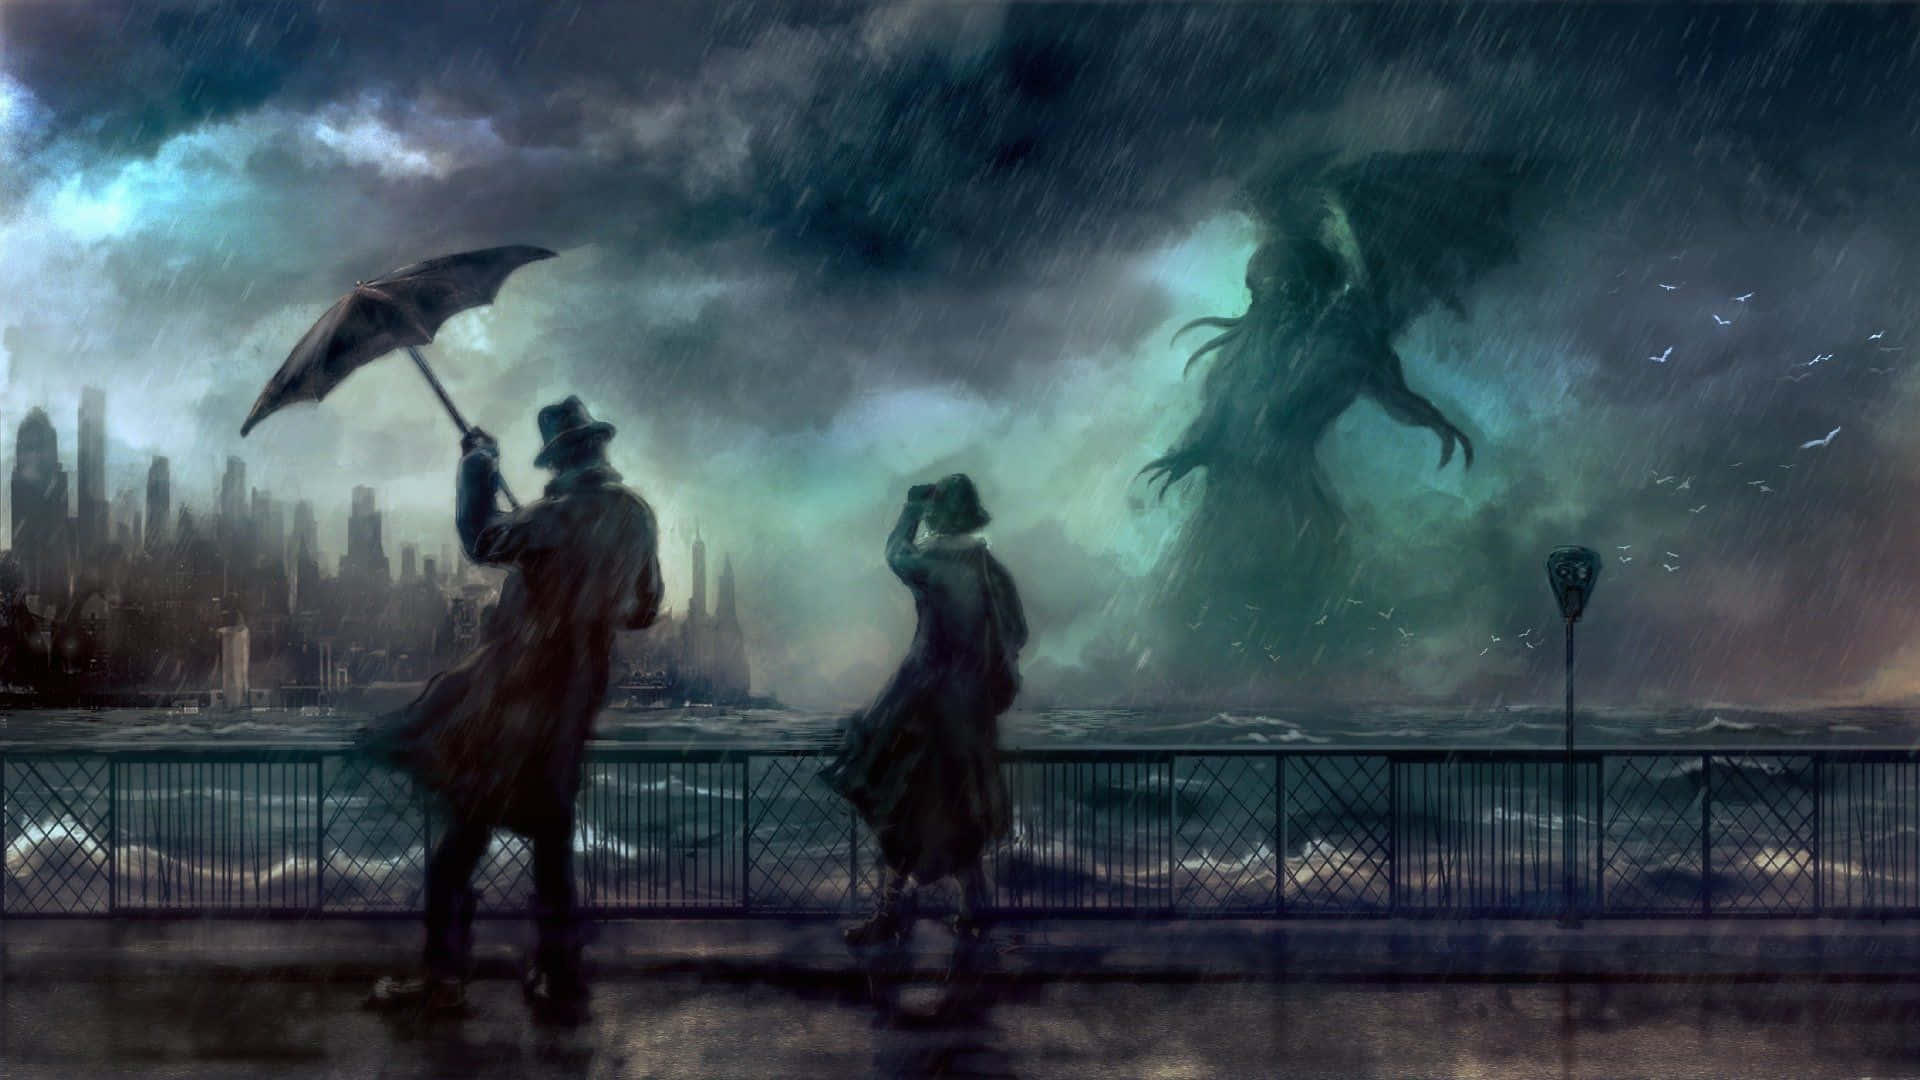 Unveil the mysteries of Lovecraft